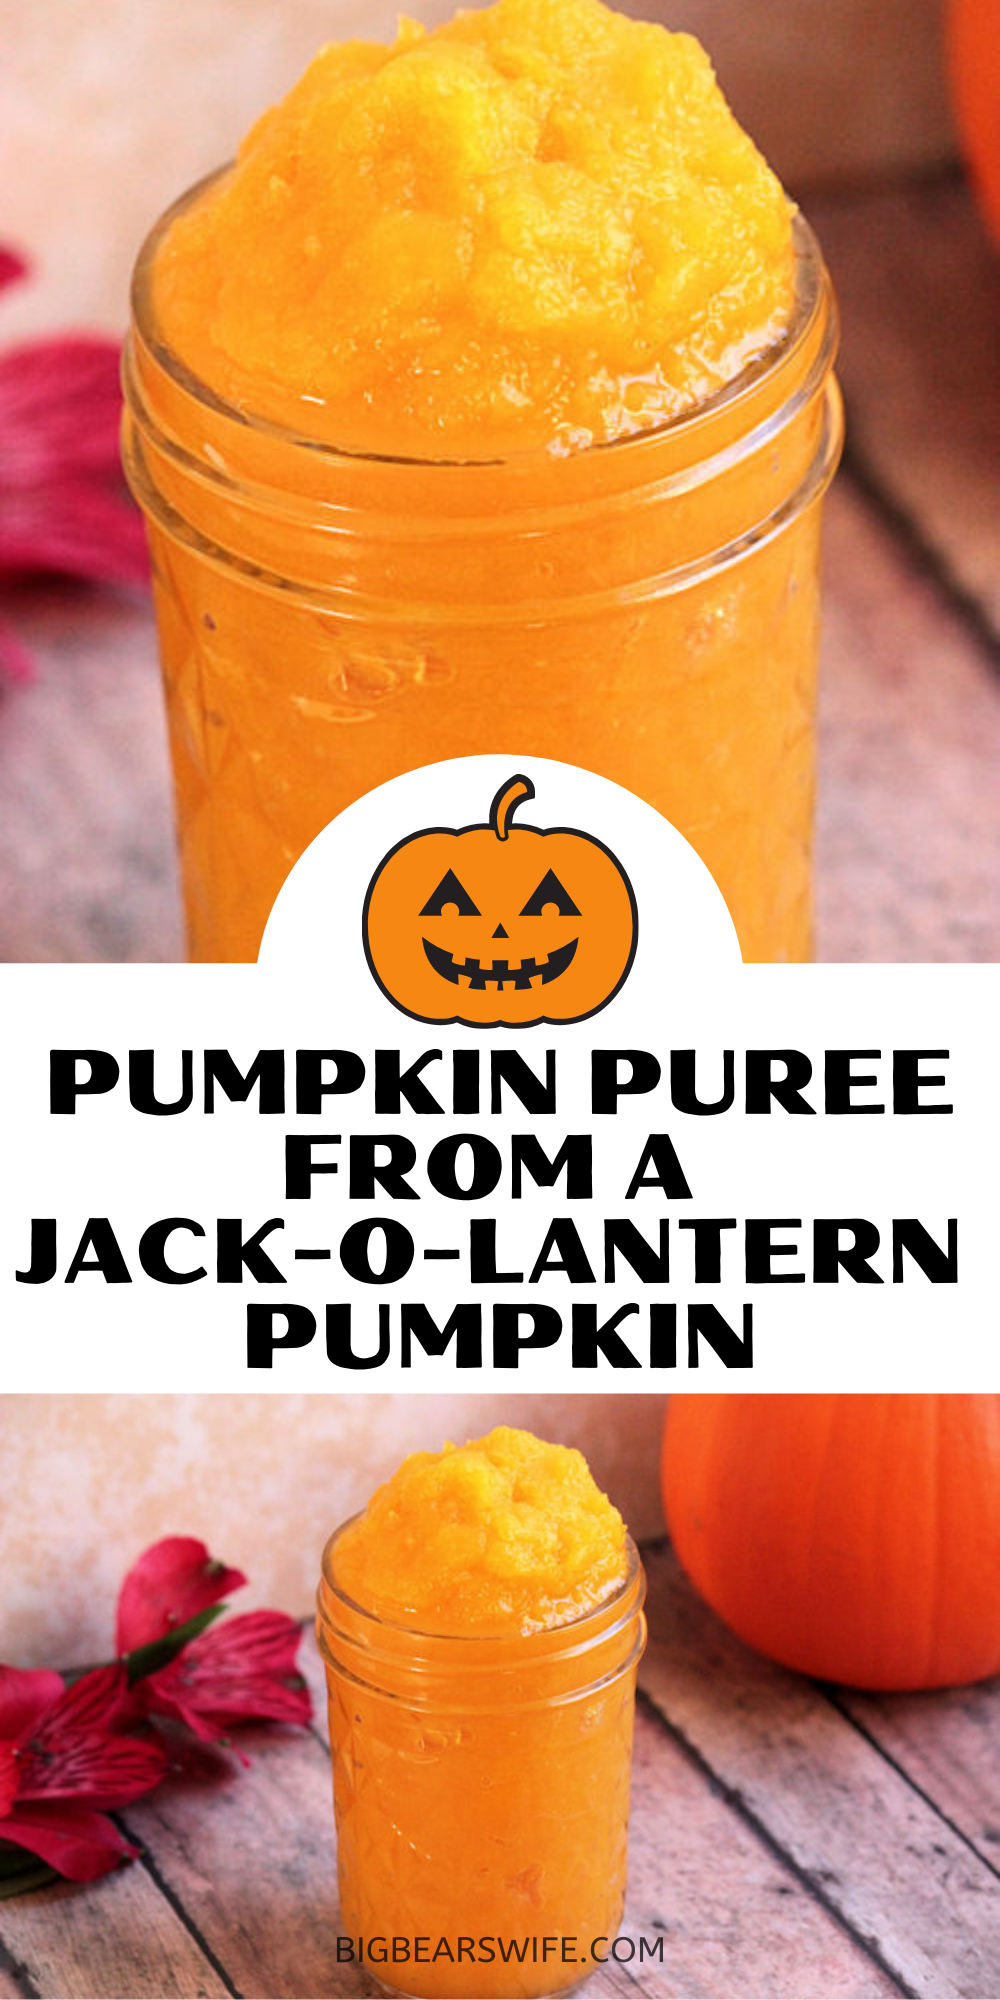 Want to make some homemade Pumpkin Desserts? Turn those un-carved pumpkins into homemade pumpkin puree! Perfect for Pumpkin Pies, Pumpkin Bread, Pumpkin Cookies and more!  This post will teach you how to make Homemade Pumpkin Puree from Jack-O-Lantern style pumpkins.  via @bigbearswife